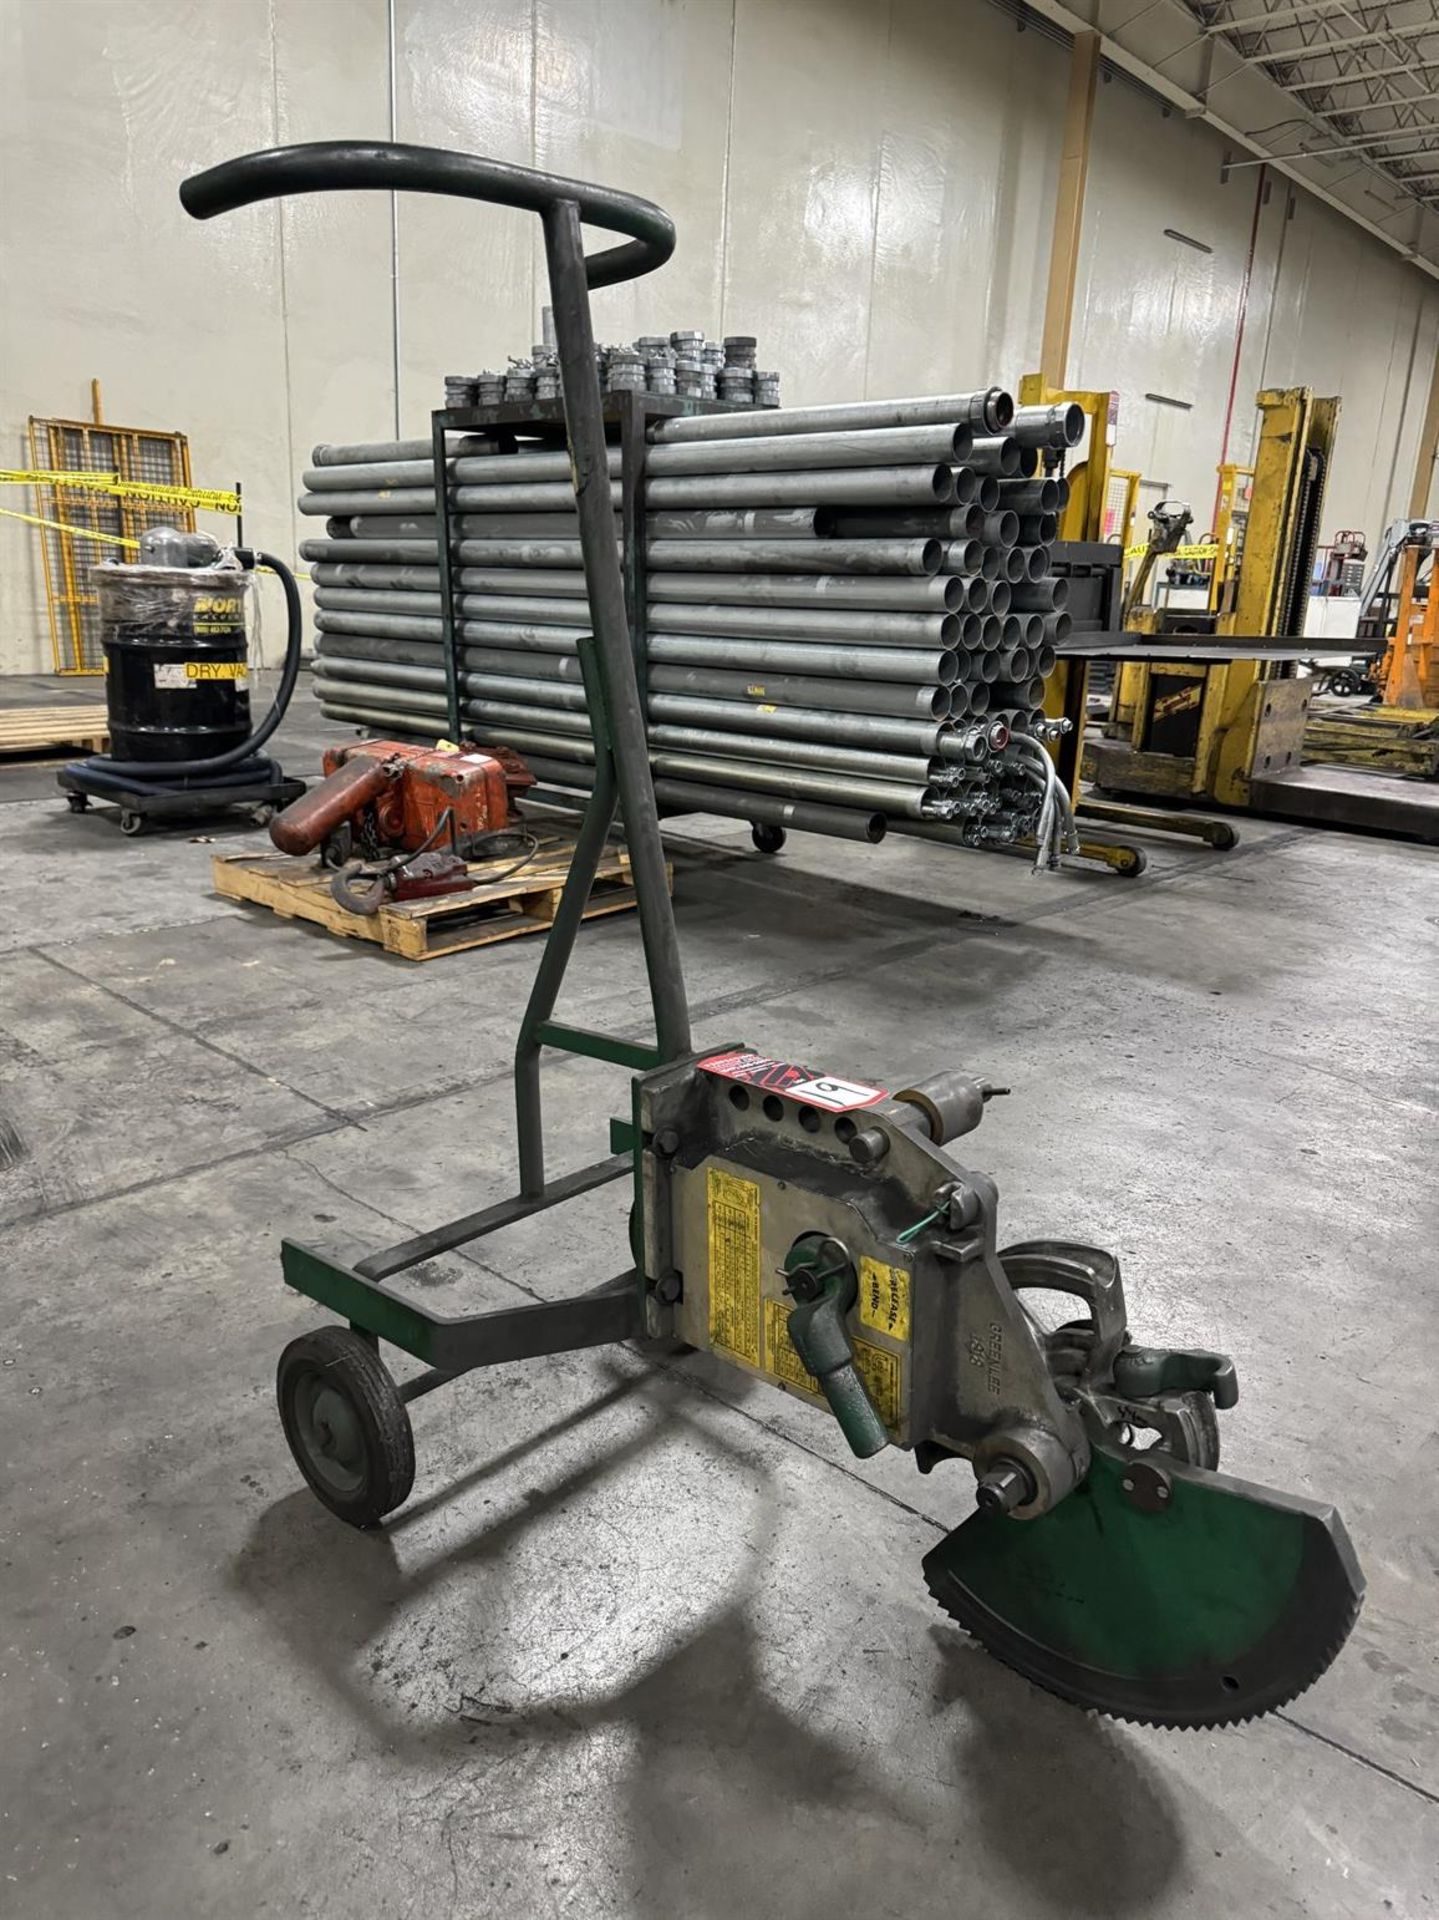 Lot Comprising GREENLEE 1818 Conduit Bender, IMPERIAL 470FH and GEAR WRENCH Tube Bender - Image 2 of 5